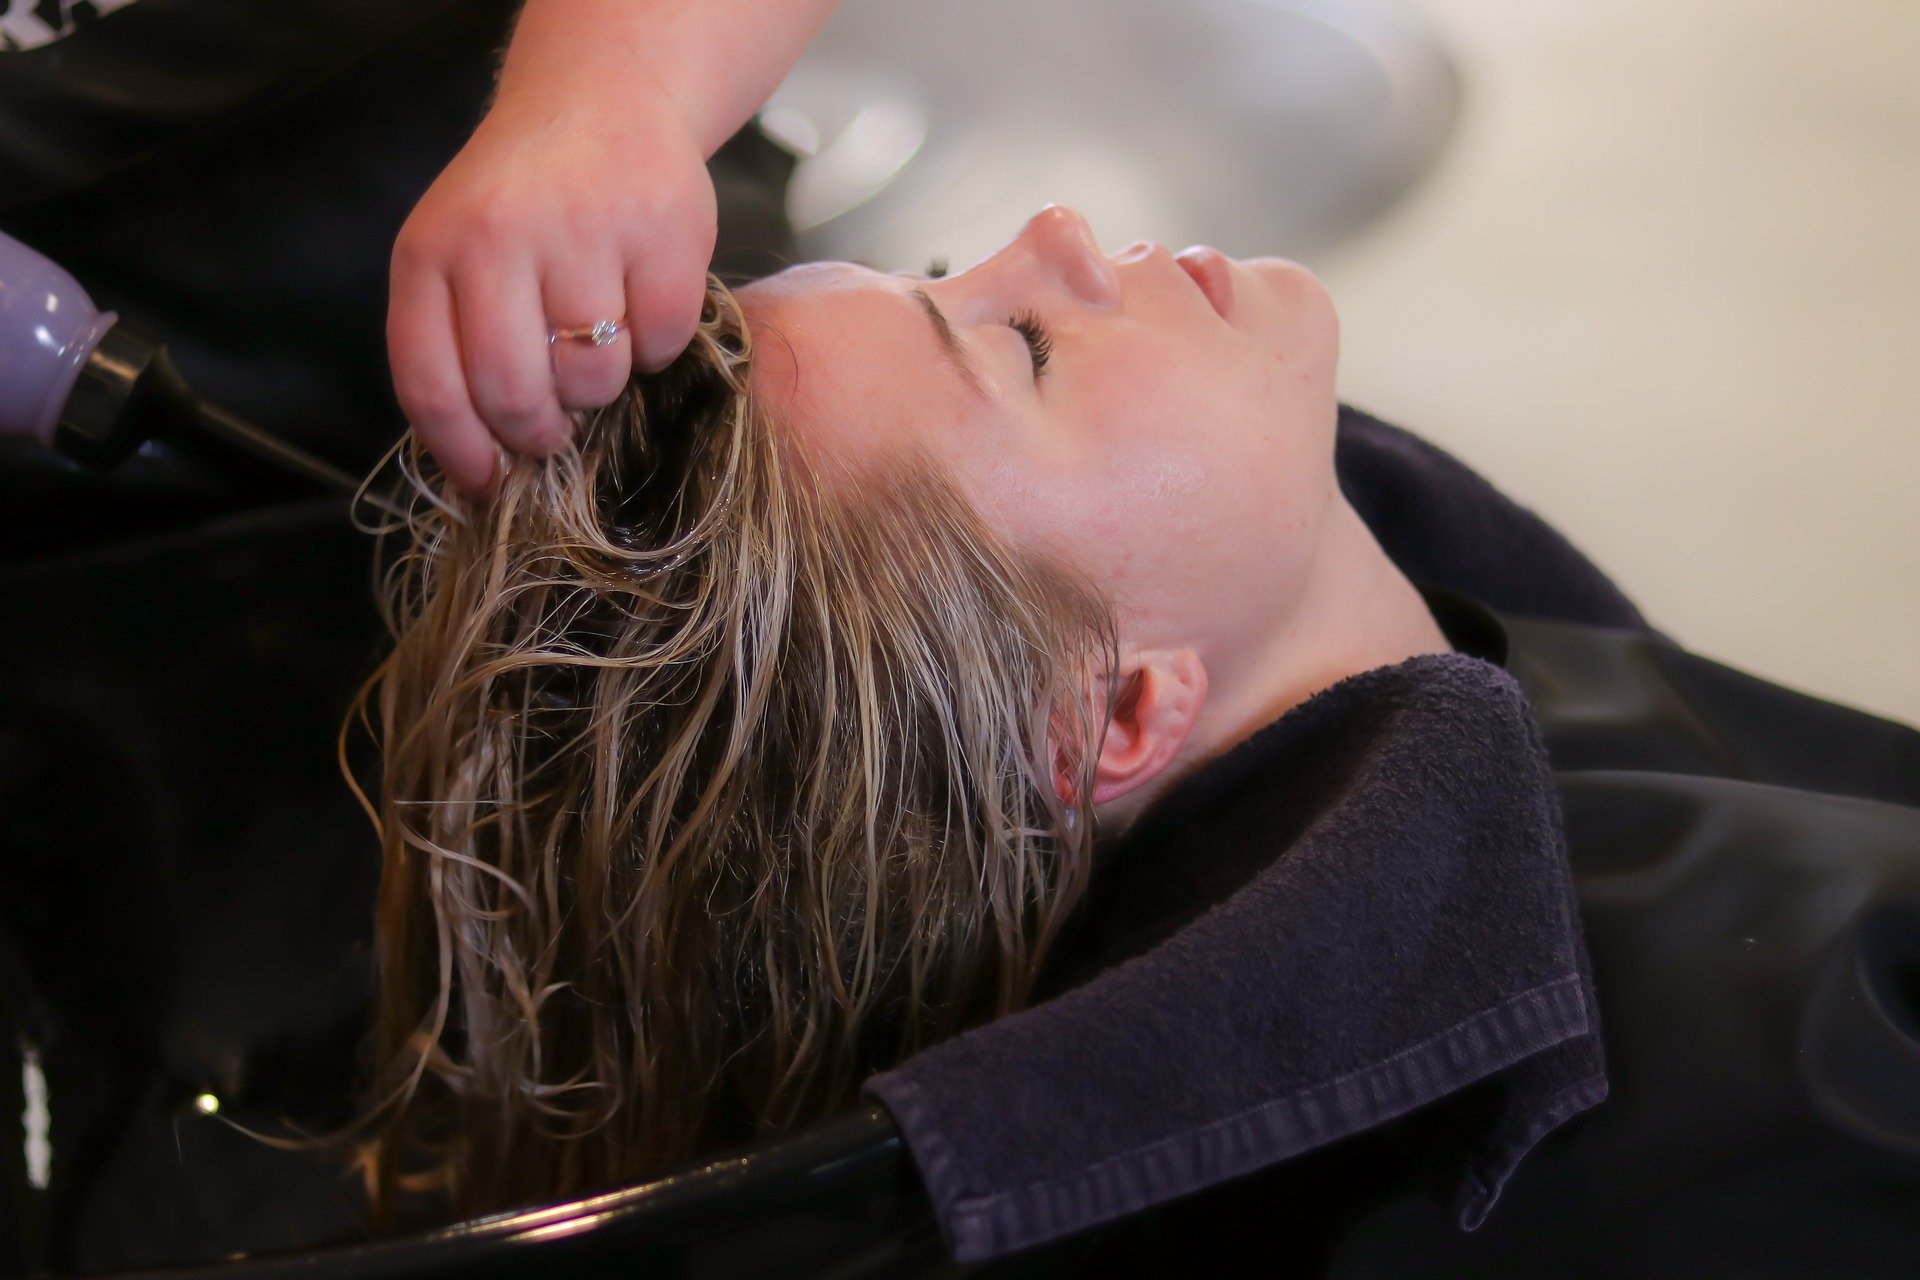 Hair Salons Could Remain Closed For Six Months Government